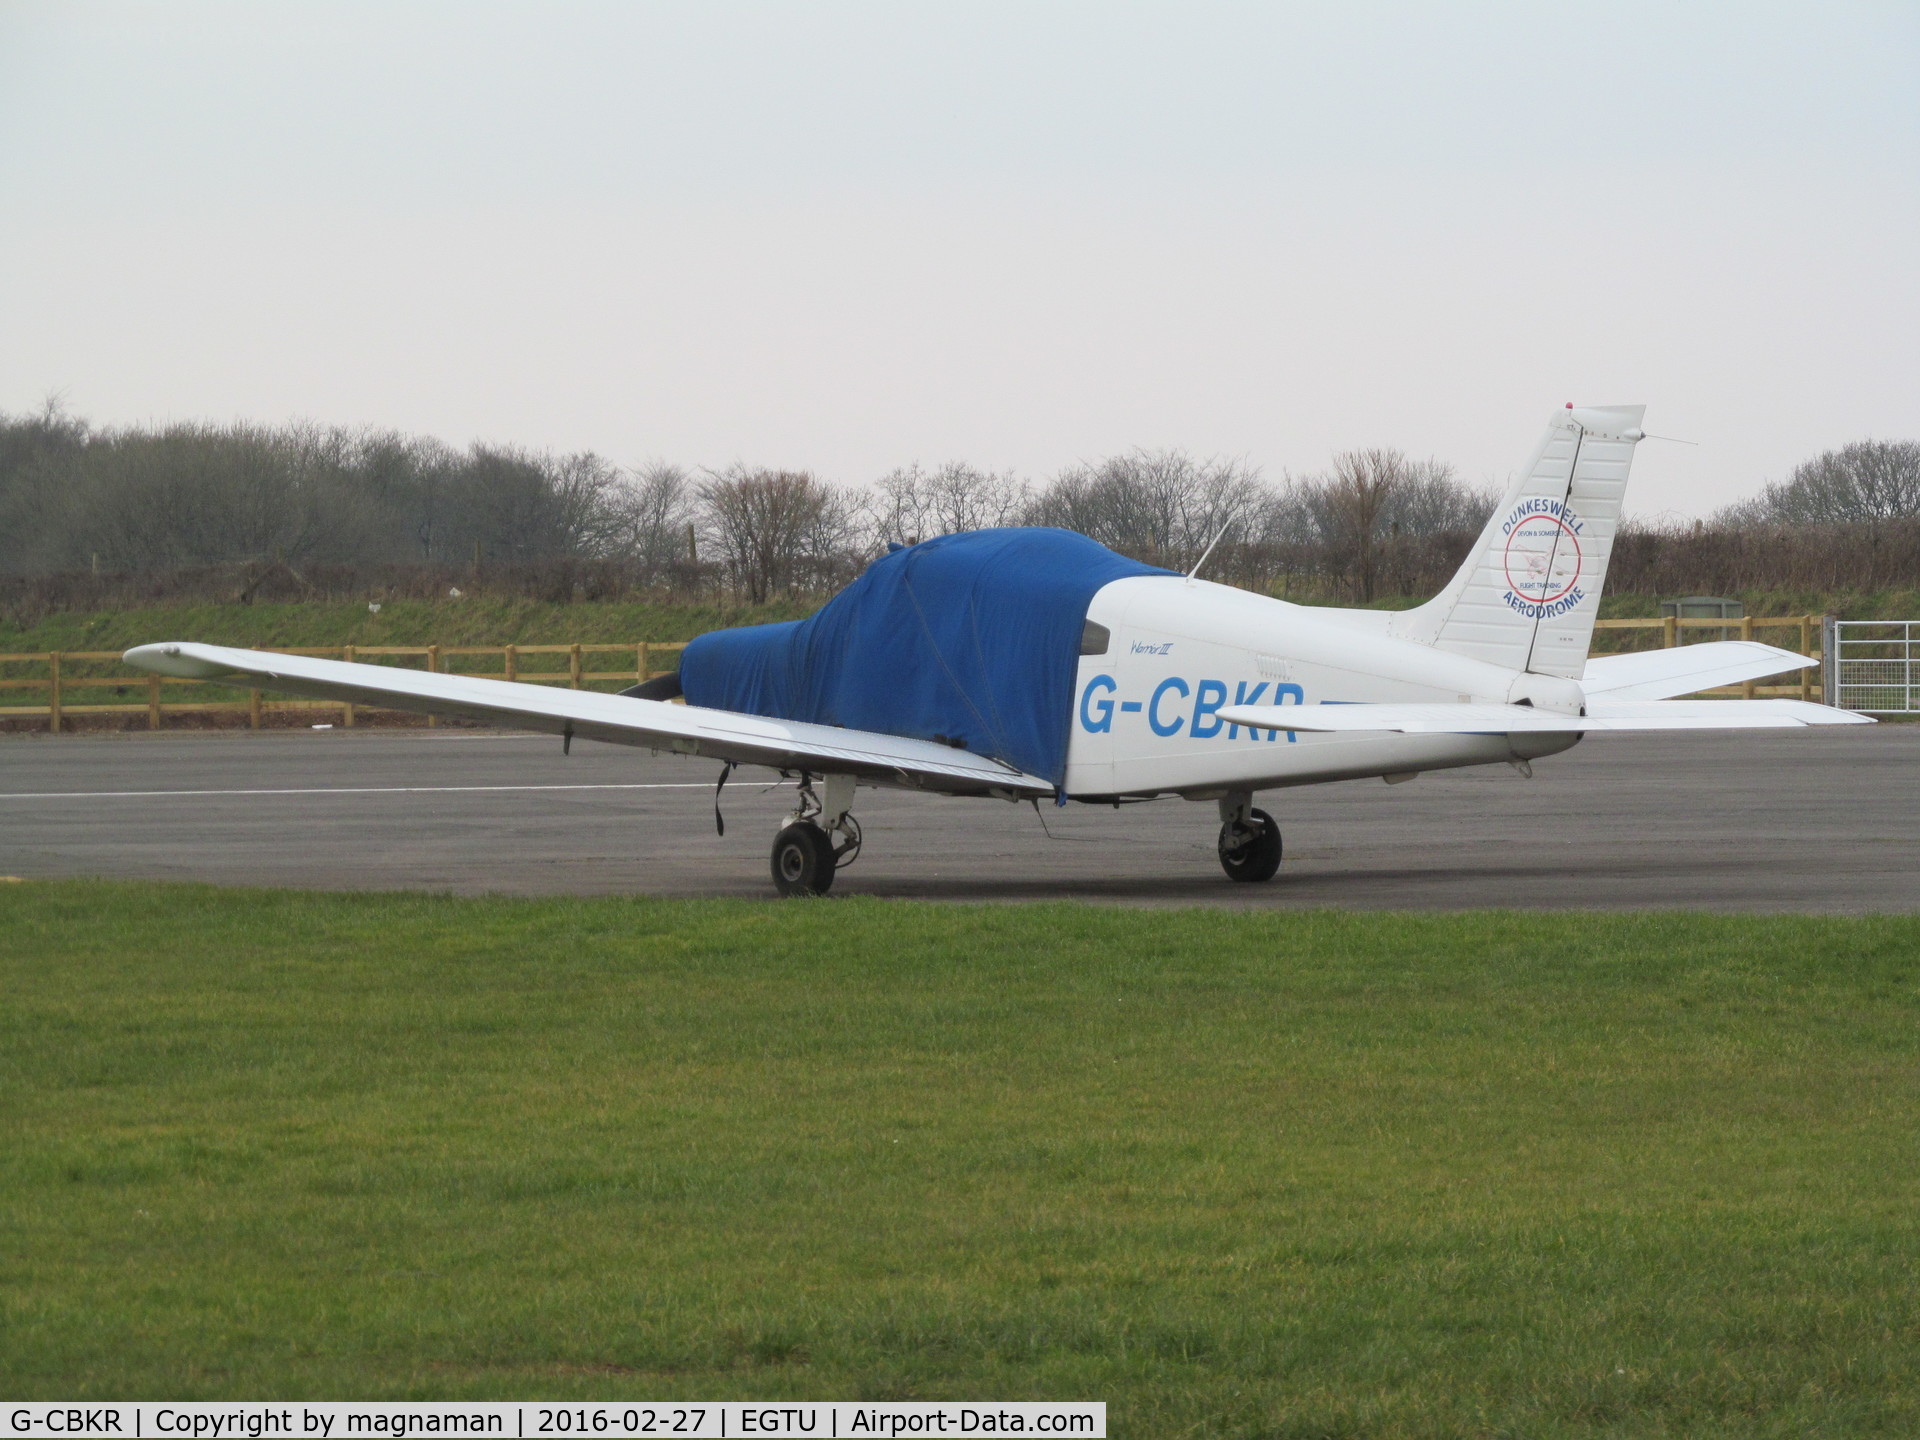 G-CBKR, 2002 Piper PA-28-161 Warrior III C/N 2842143, on apron by skydive cafe